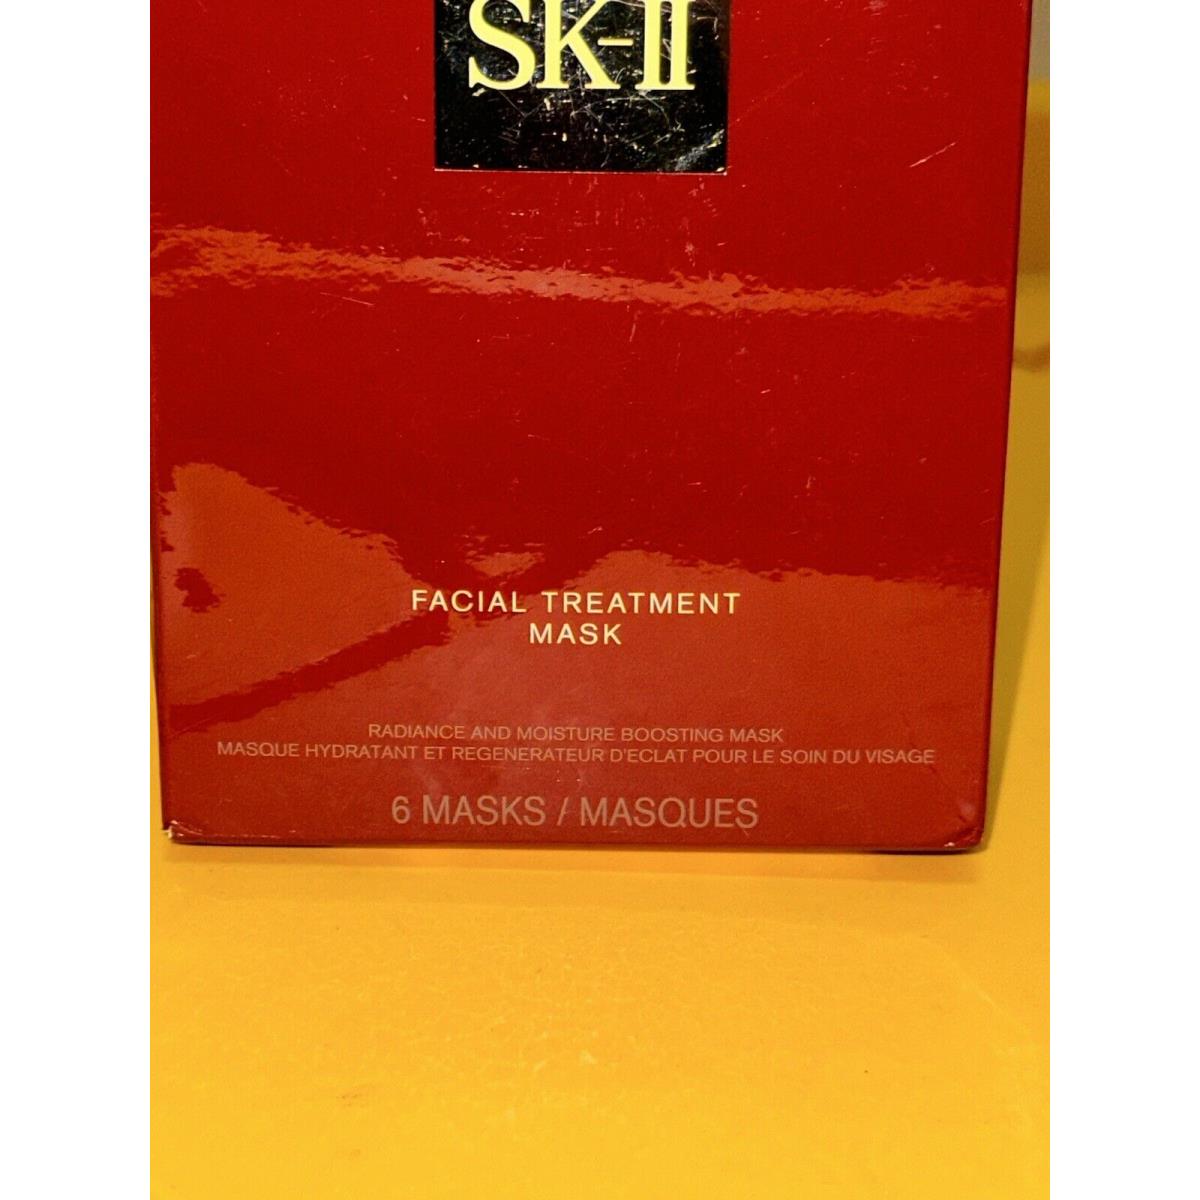 Sk-ii Facial Treatment Mask Radiance and Moisture Boost Masks 6 Units